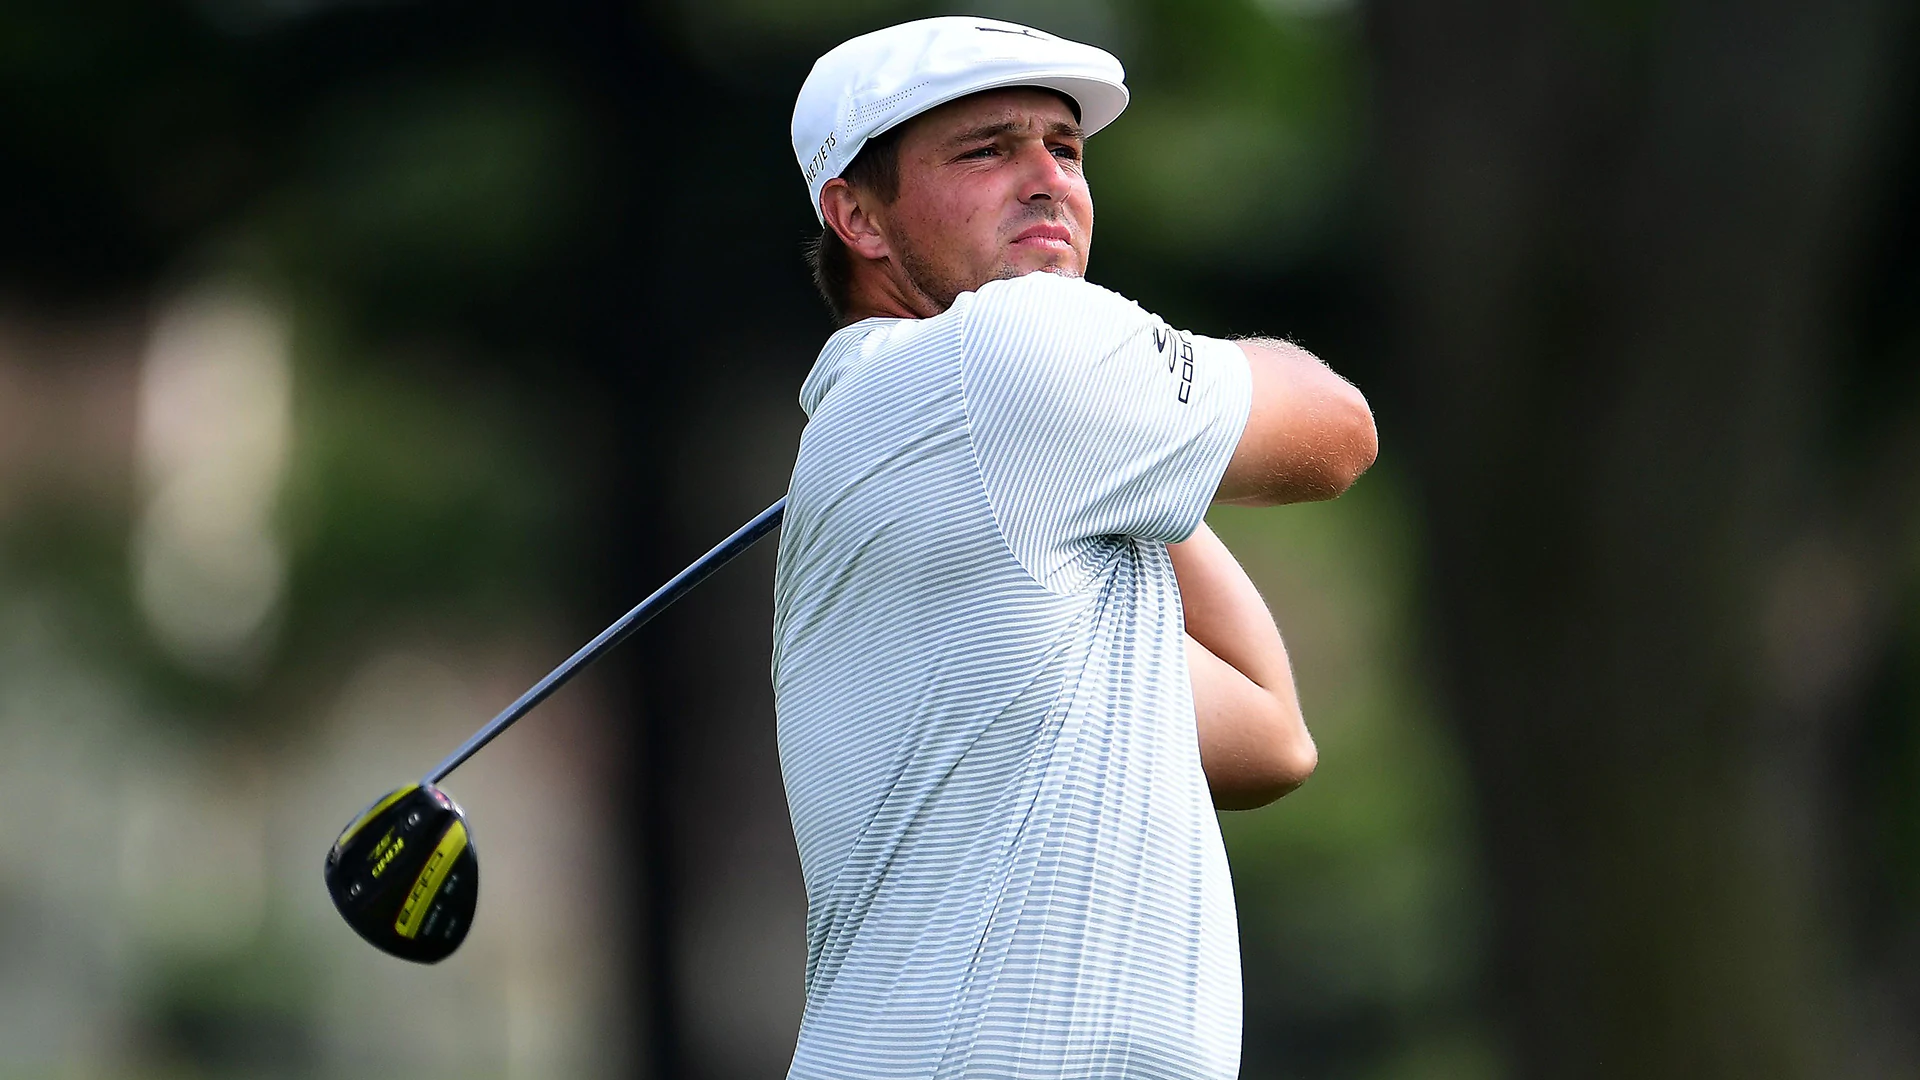 Despite opening 66, Bryson DeChambeau ‘agitated’ with his ‘B-game’